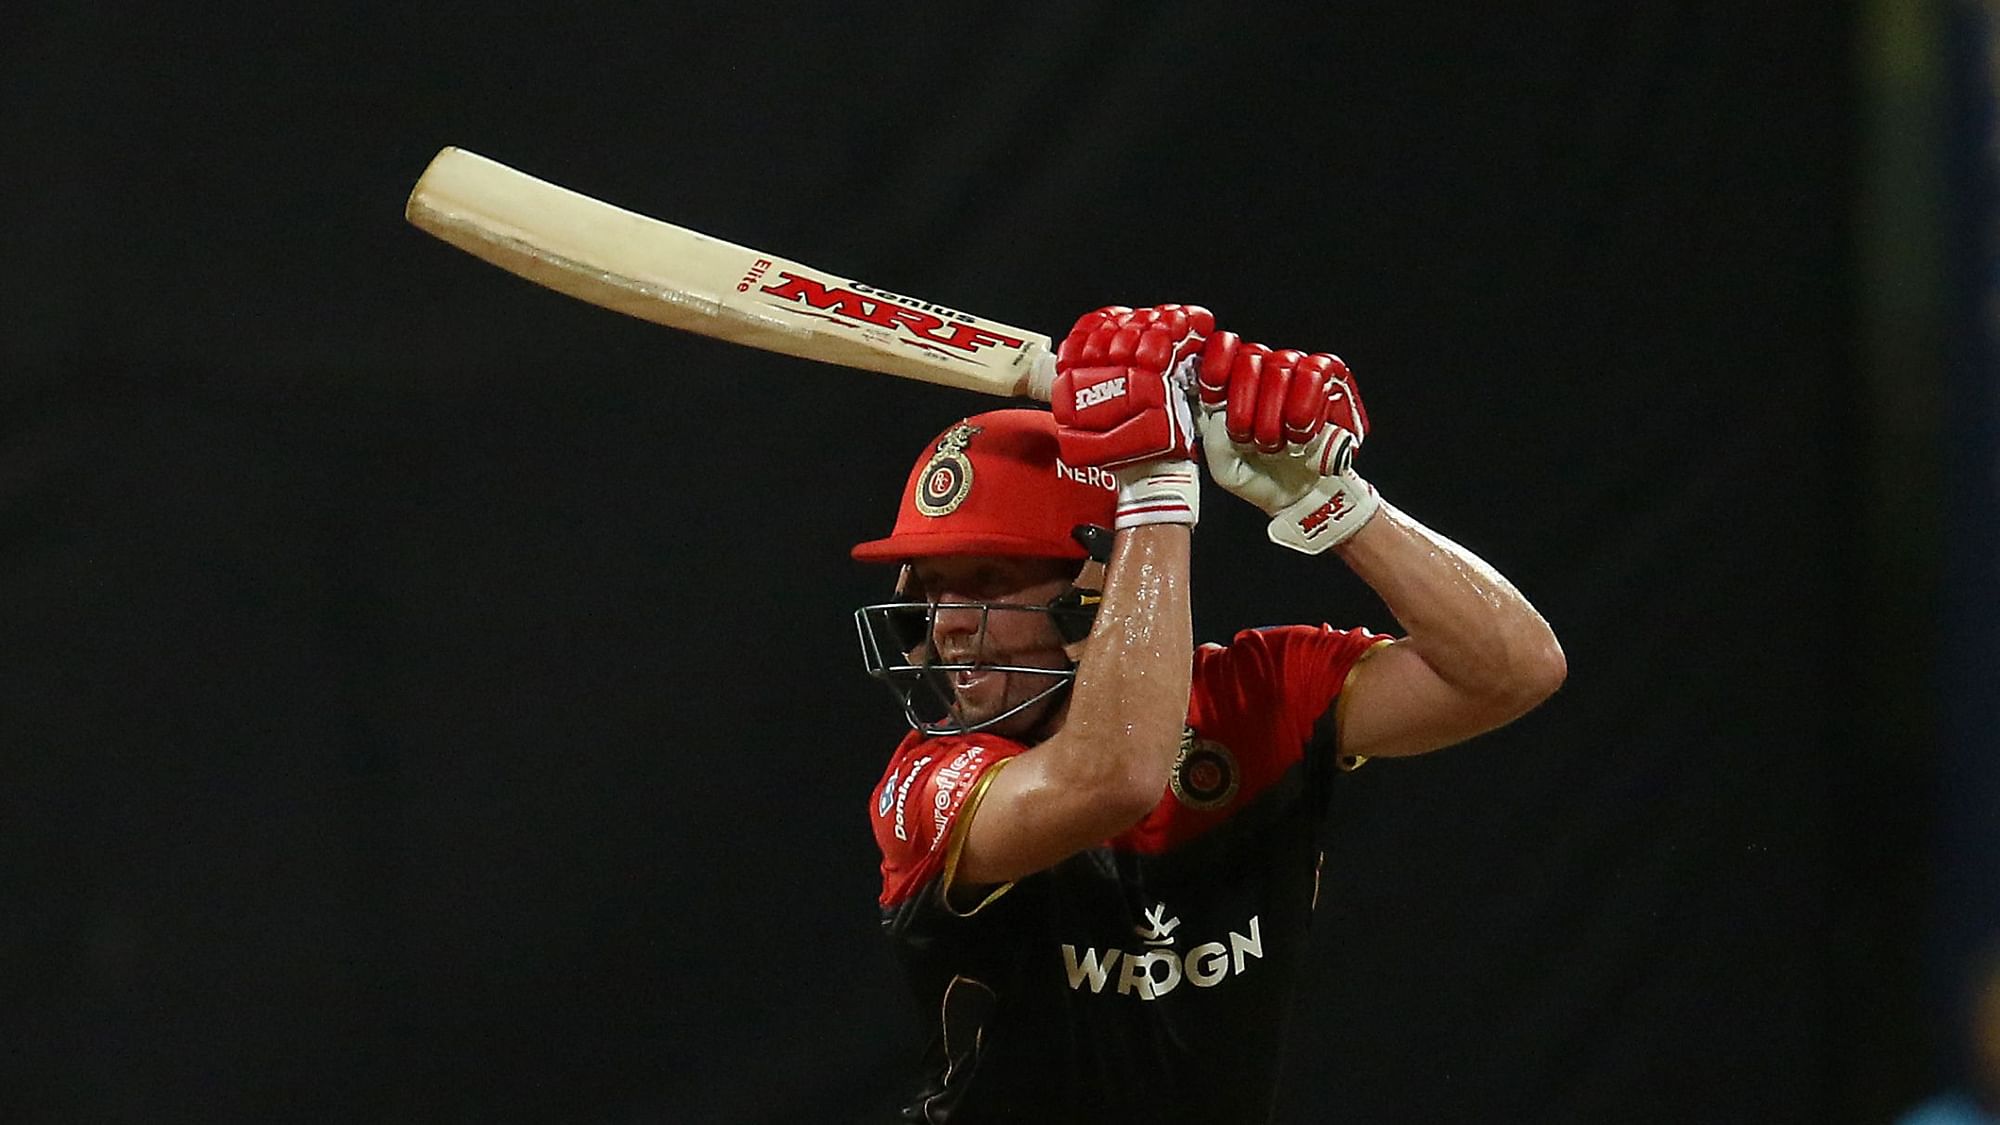 Put into bat, Royal Challengers Bangalore scored 171 for 7 in their IPL match against Mumbai Indians.